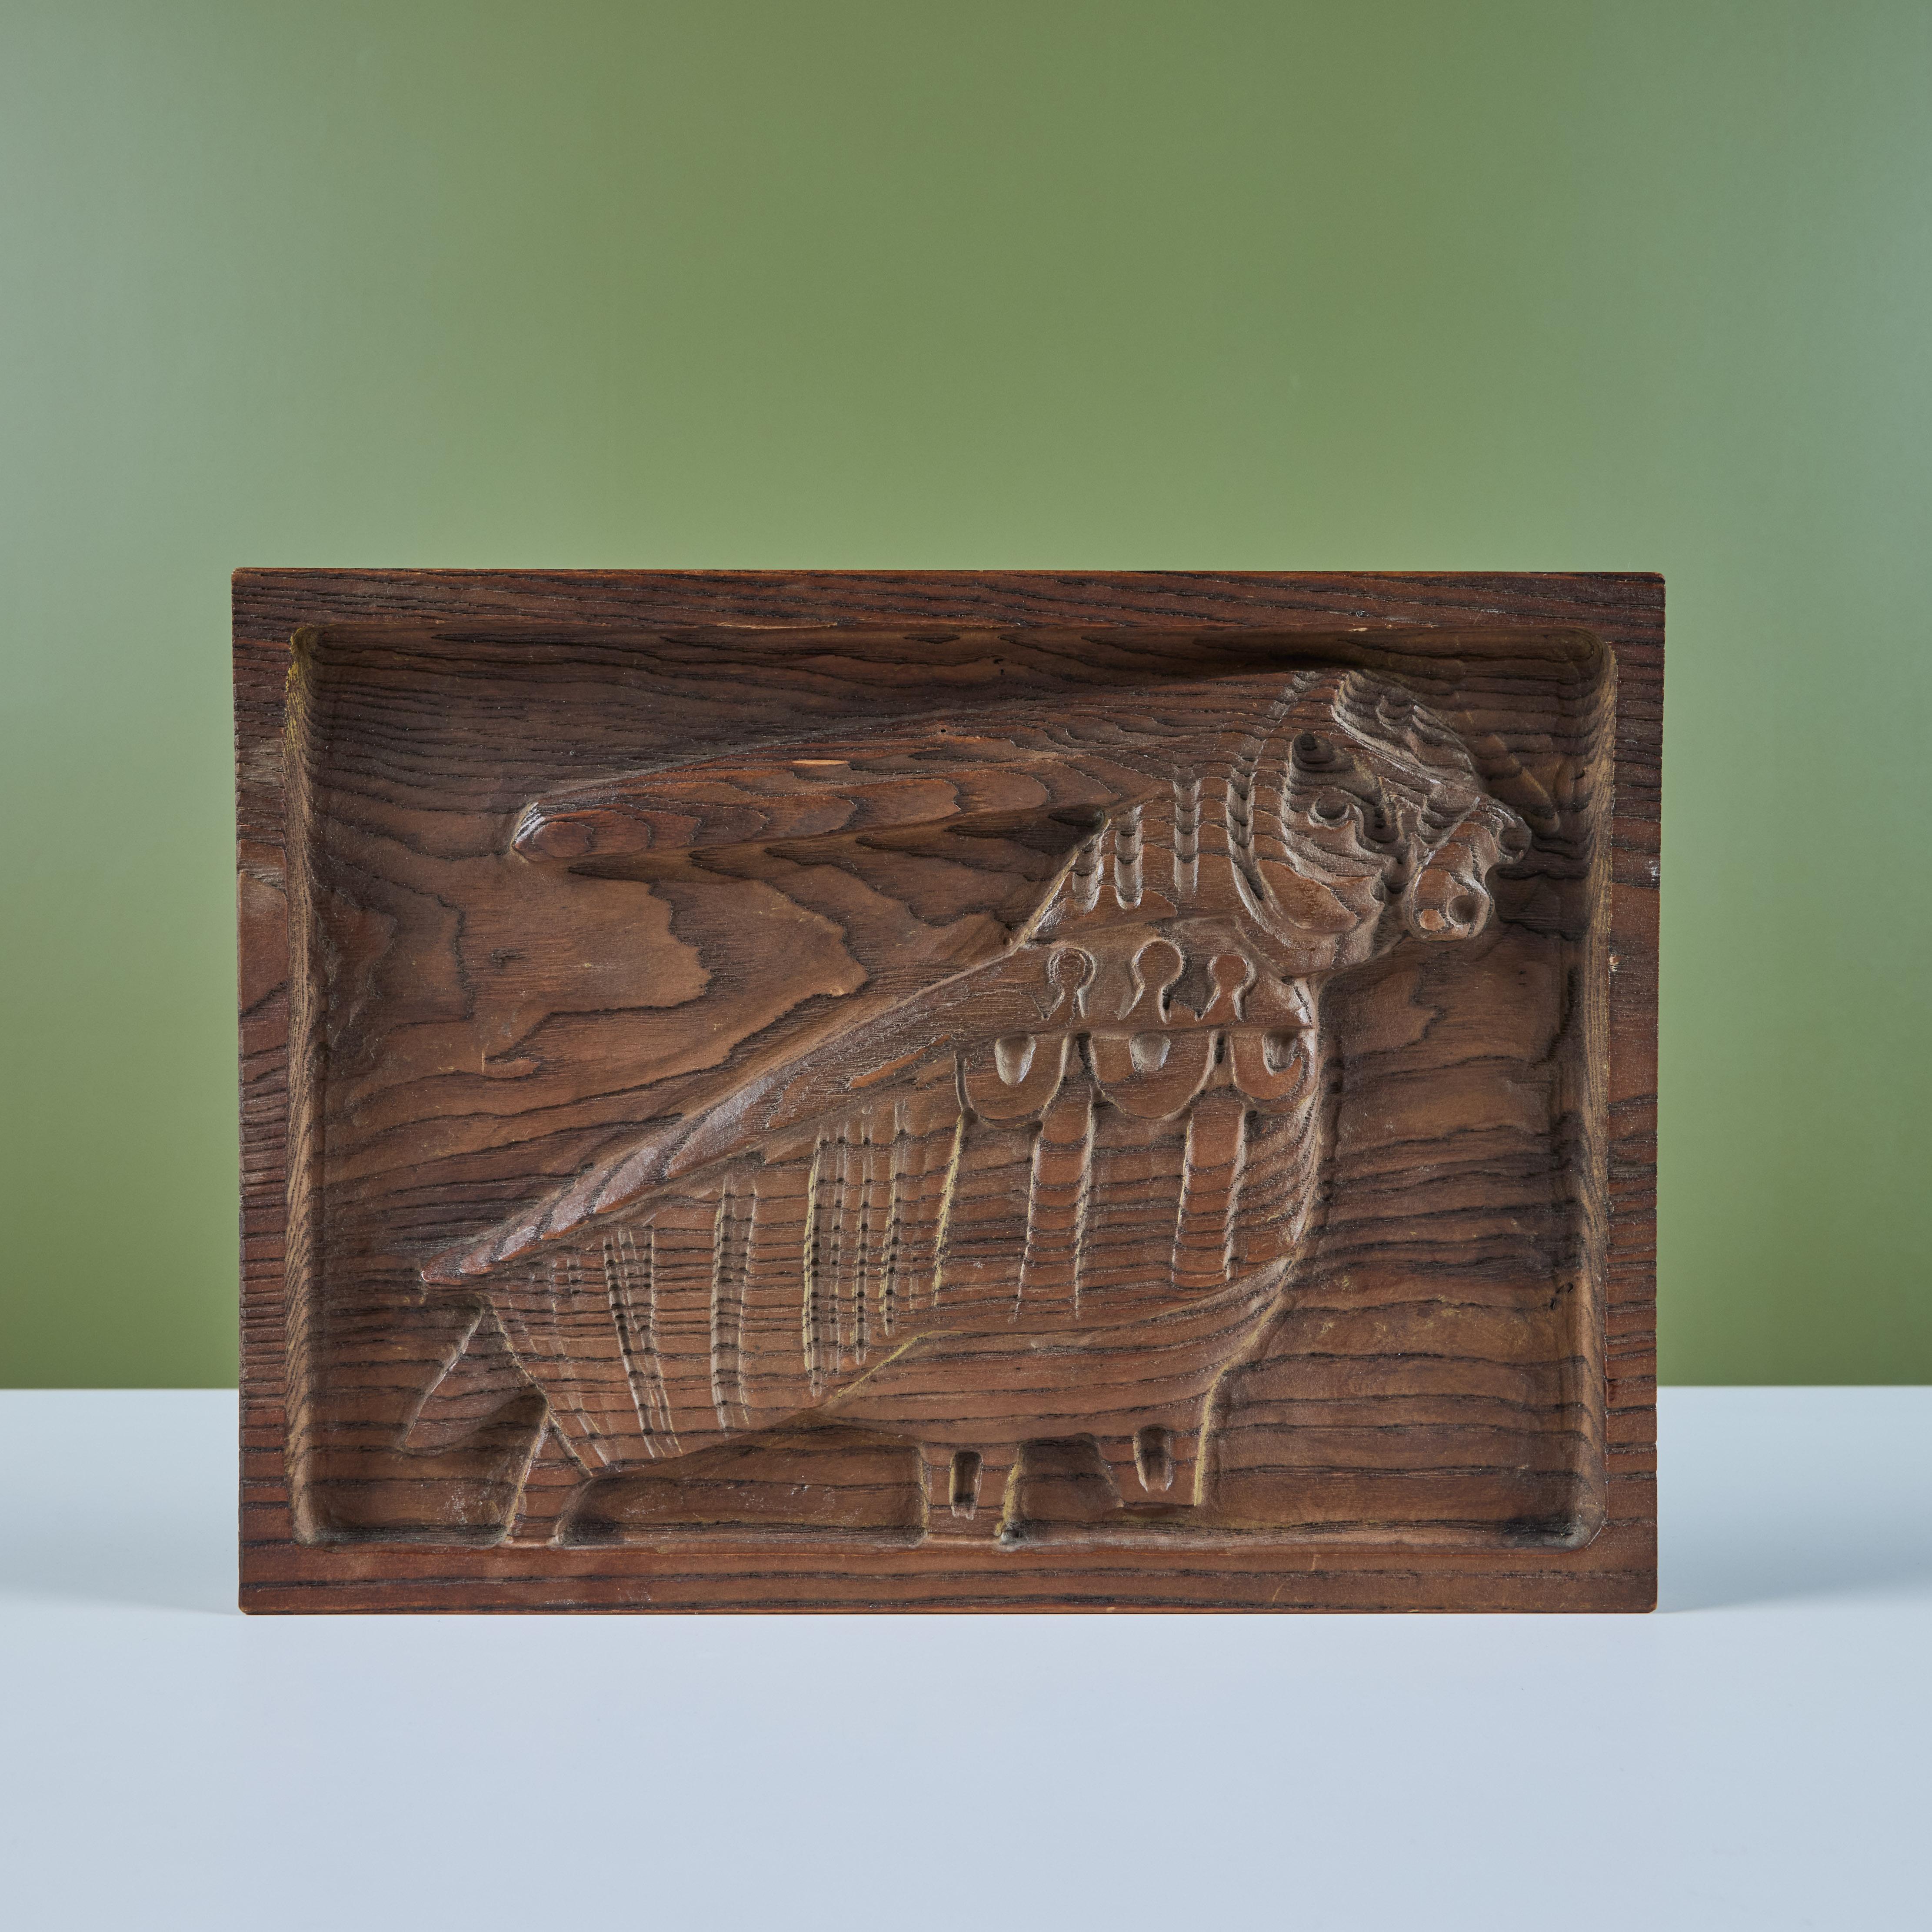 Wood carving by California artist, Evelyn Ackerman, c.1960s. This carving features a hand carved creature.

Dimensions
12.5